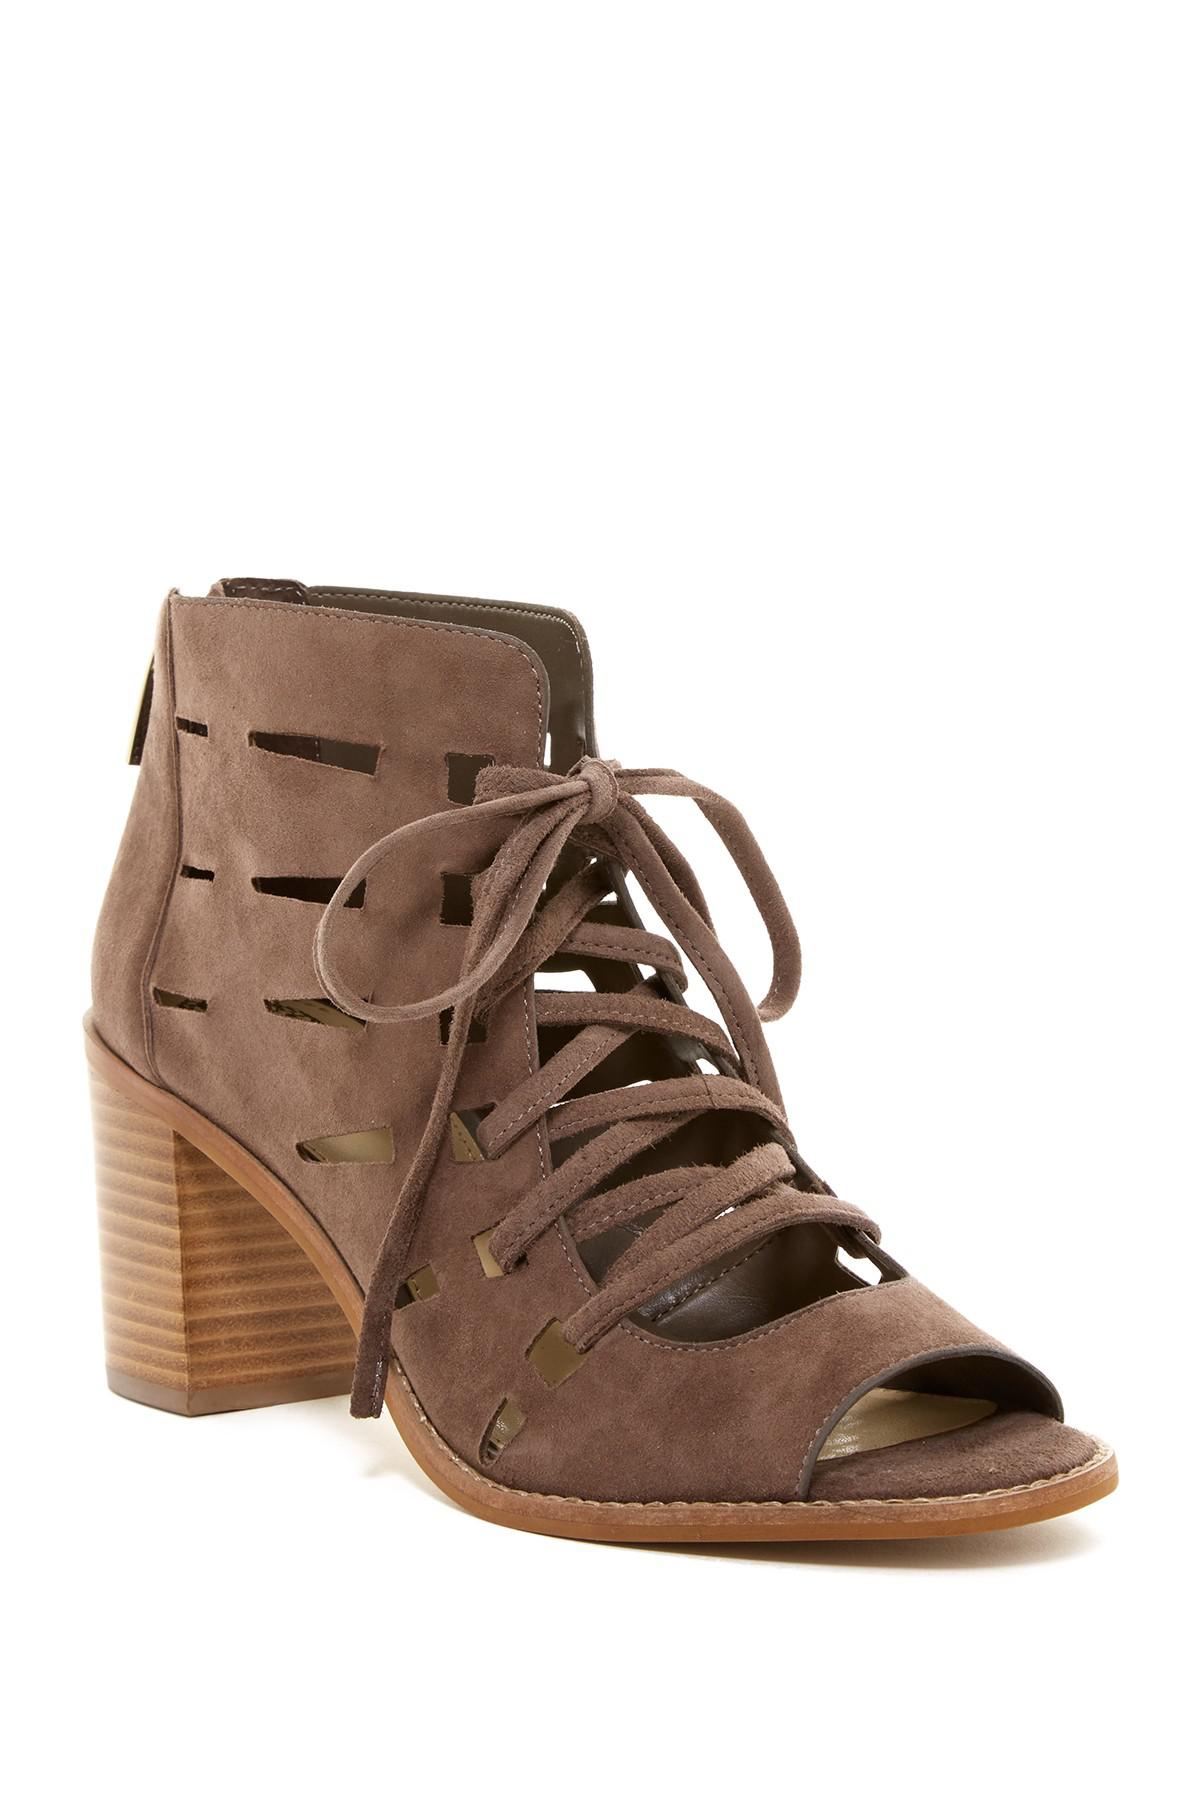 Lyst - Vince Camuto Tressa Perforated Leather Block Heel Sandal in Brown